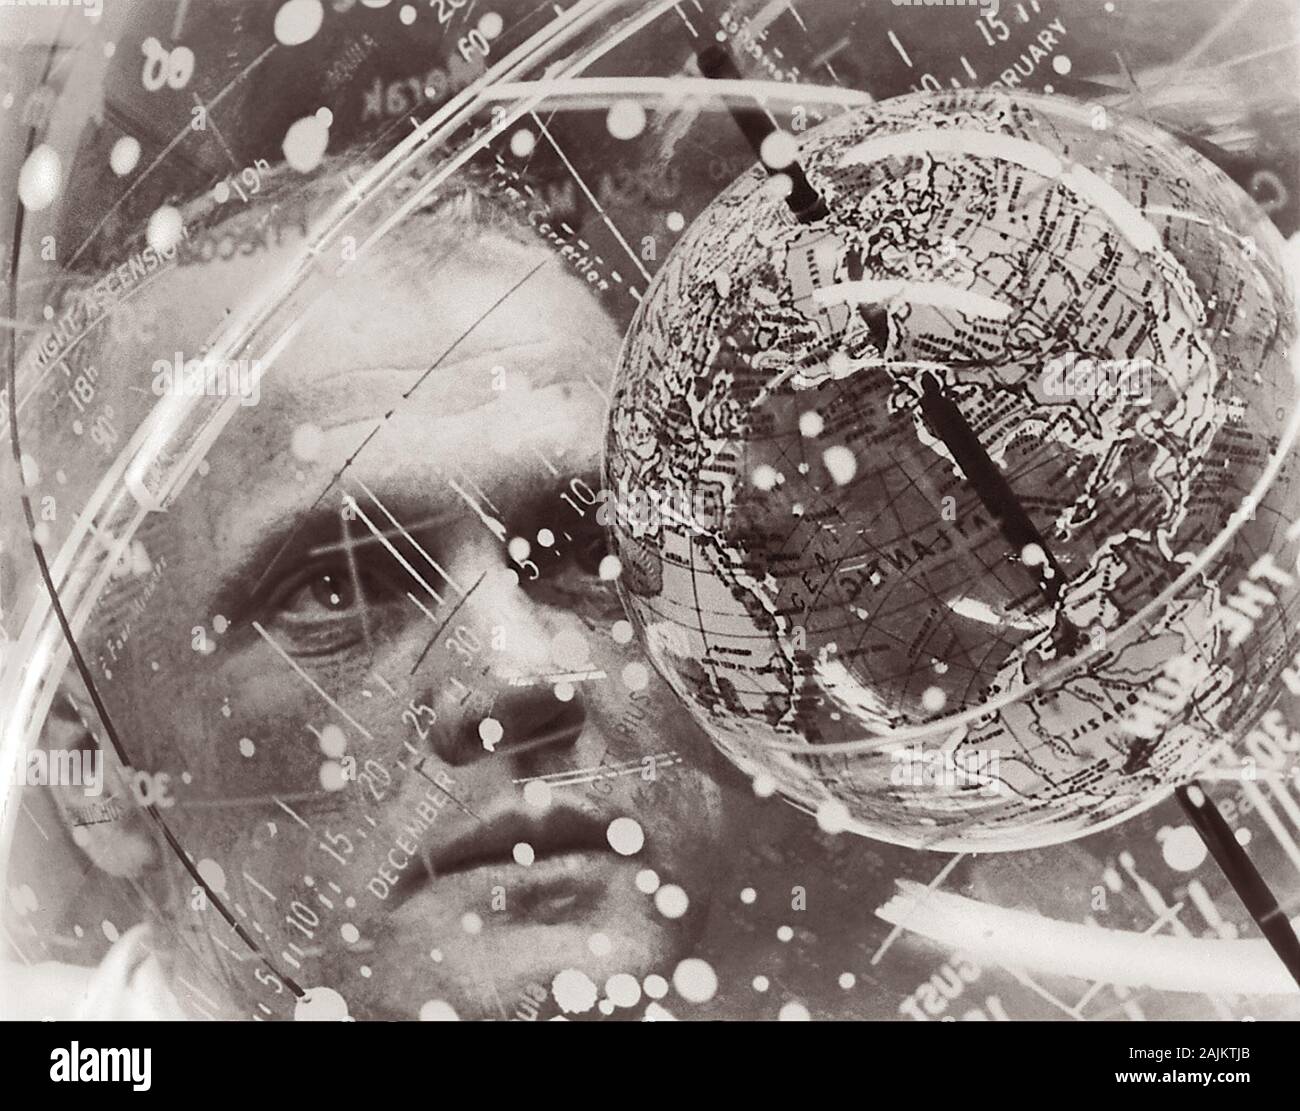 American astronaut John Herschel Glenn Jr. (1921-2016) looking into a space globe known as a 'Celestial Training Device' at the Aeromedical Laboratory at Cape Canaveral, Florida. Glenn is shown here in February 1962, the same month he became the first American to orbit Earth on NASA's Mercury-Atlas 6 Mission. Stock Photo